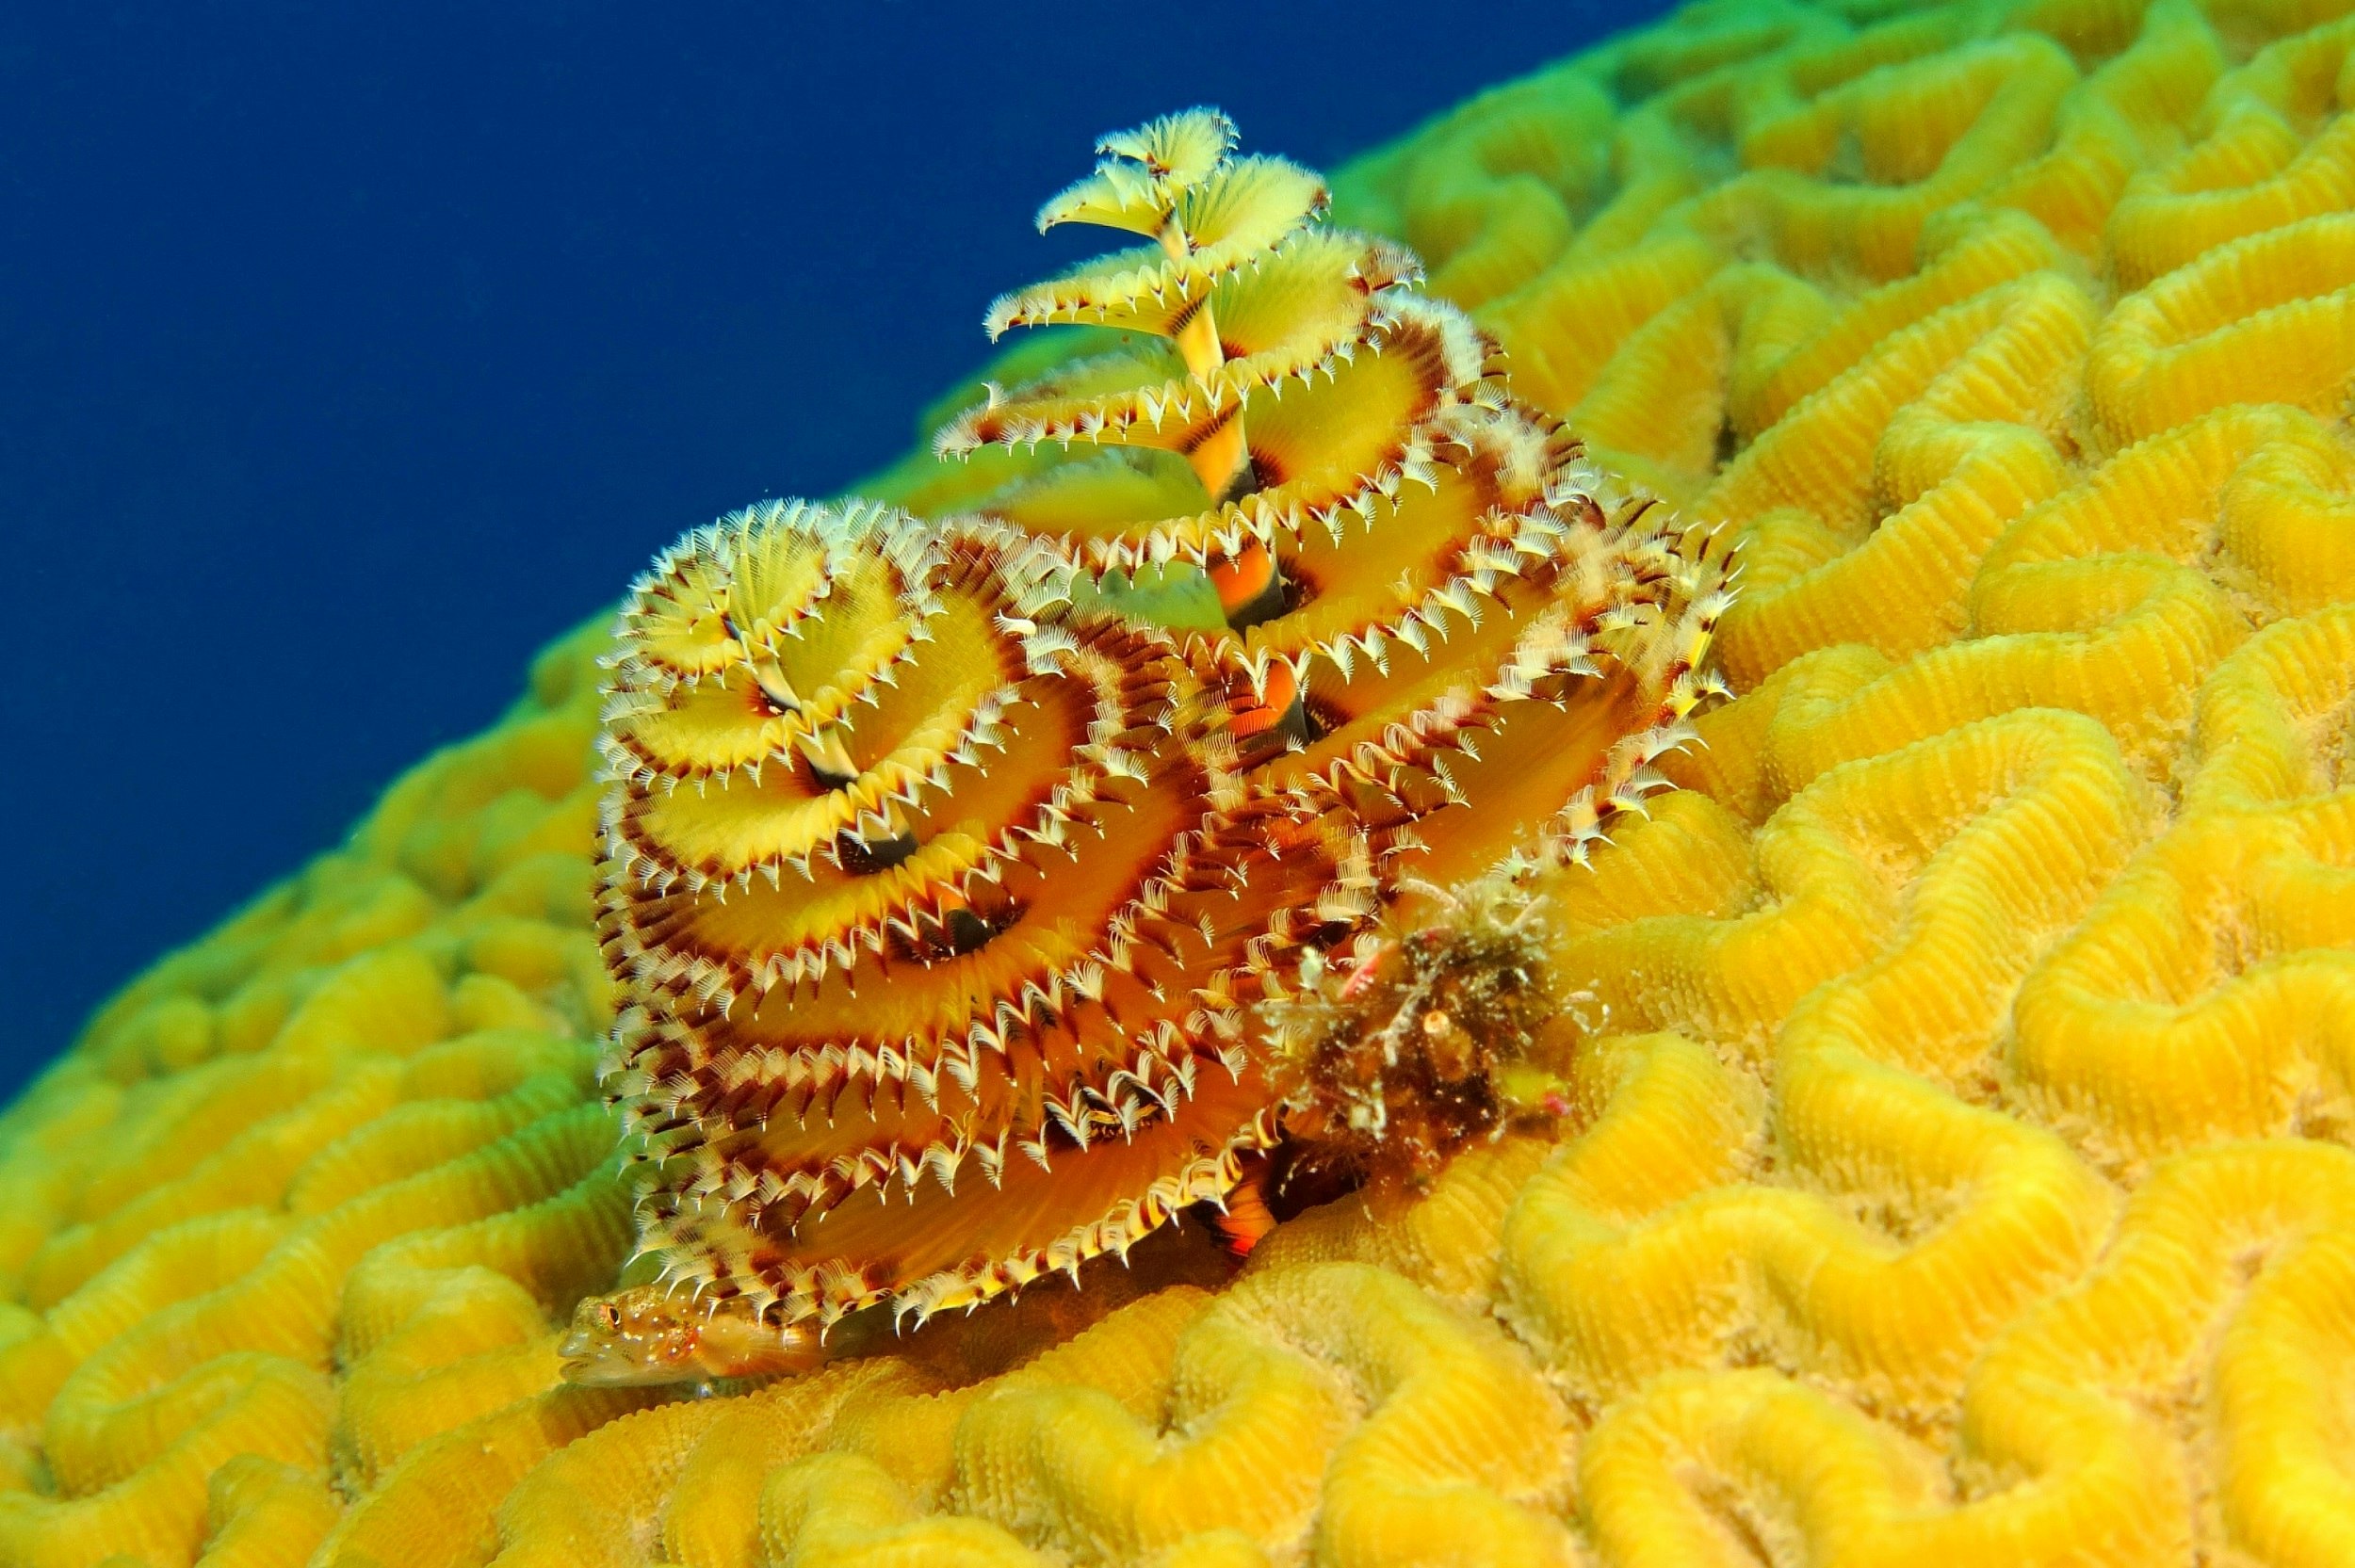 Close-up shot of Christmas tree worm coral: a tight yellow spiral on top of a rippled brain-like coral. A small yellow fish peeks out from underneath.